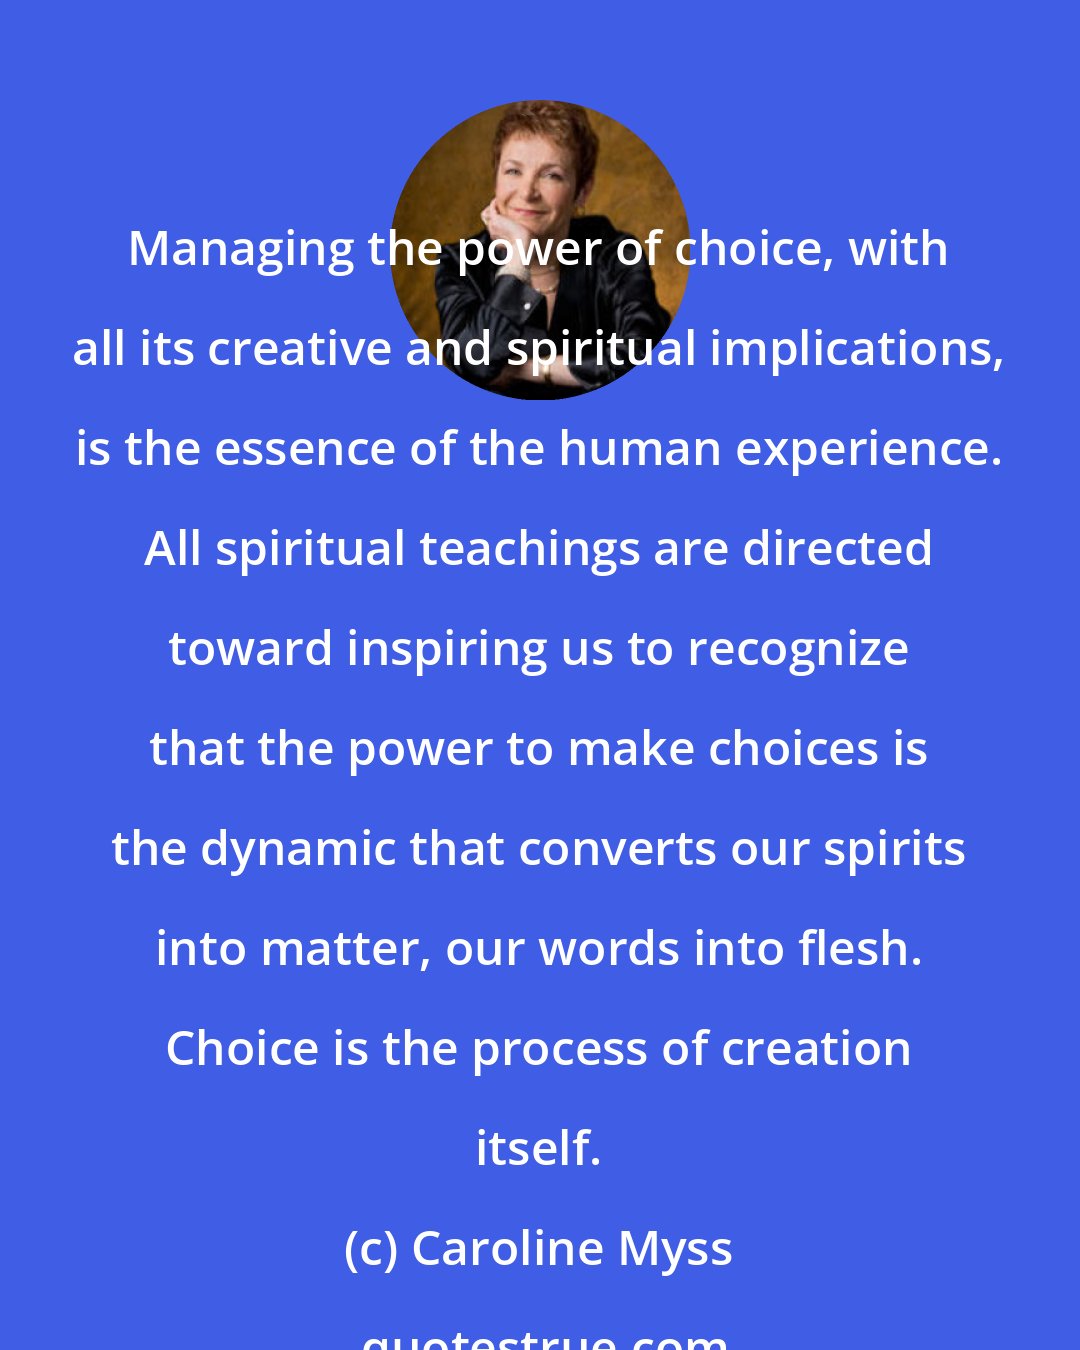 Caroline Myss: Managing the power of choice, with all its creative and spiritual implications, is the essence of the human experience. All spiritual teachings are directed toward inspiring us to recognize that the power to make choices is the dynamic that converts our spirits into matter, our words into flesh. Choice is the process of creation itself.